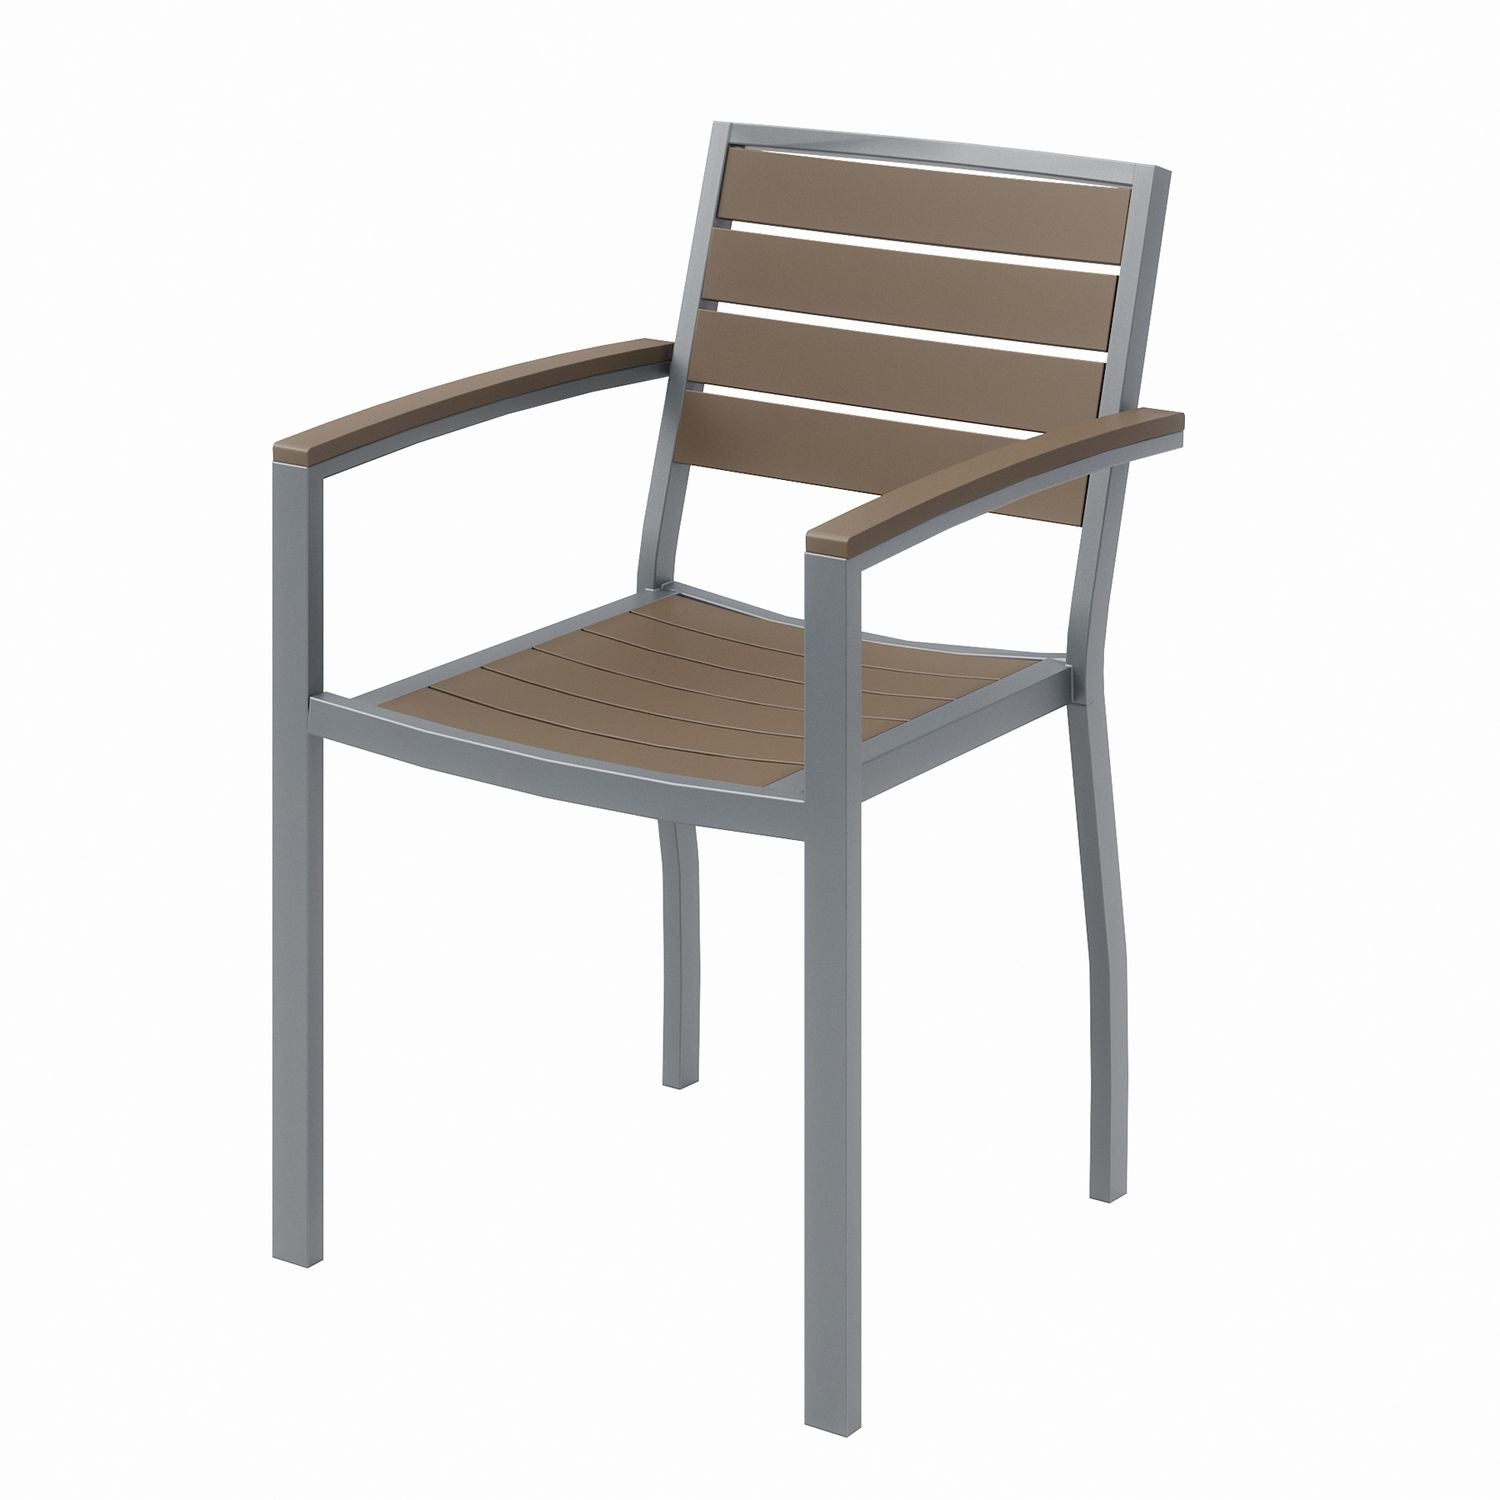 eveleen-outdoor-patio-table-4-mocha-powder-coated-polymer-chairs-round-36-dia-x-29h-fashion-gray-ships-in-4-6-bus-days_kfi840031918482 - 3